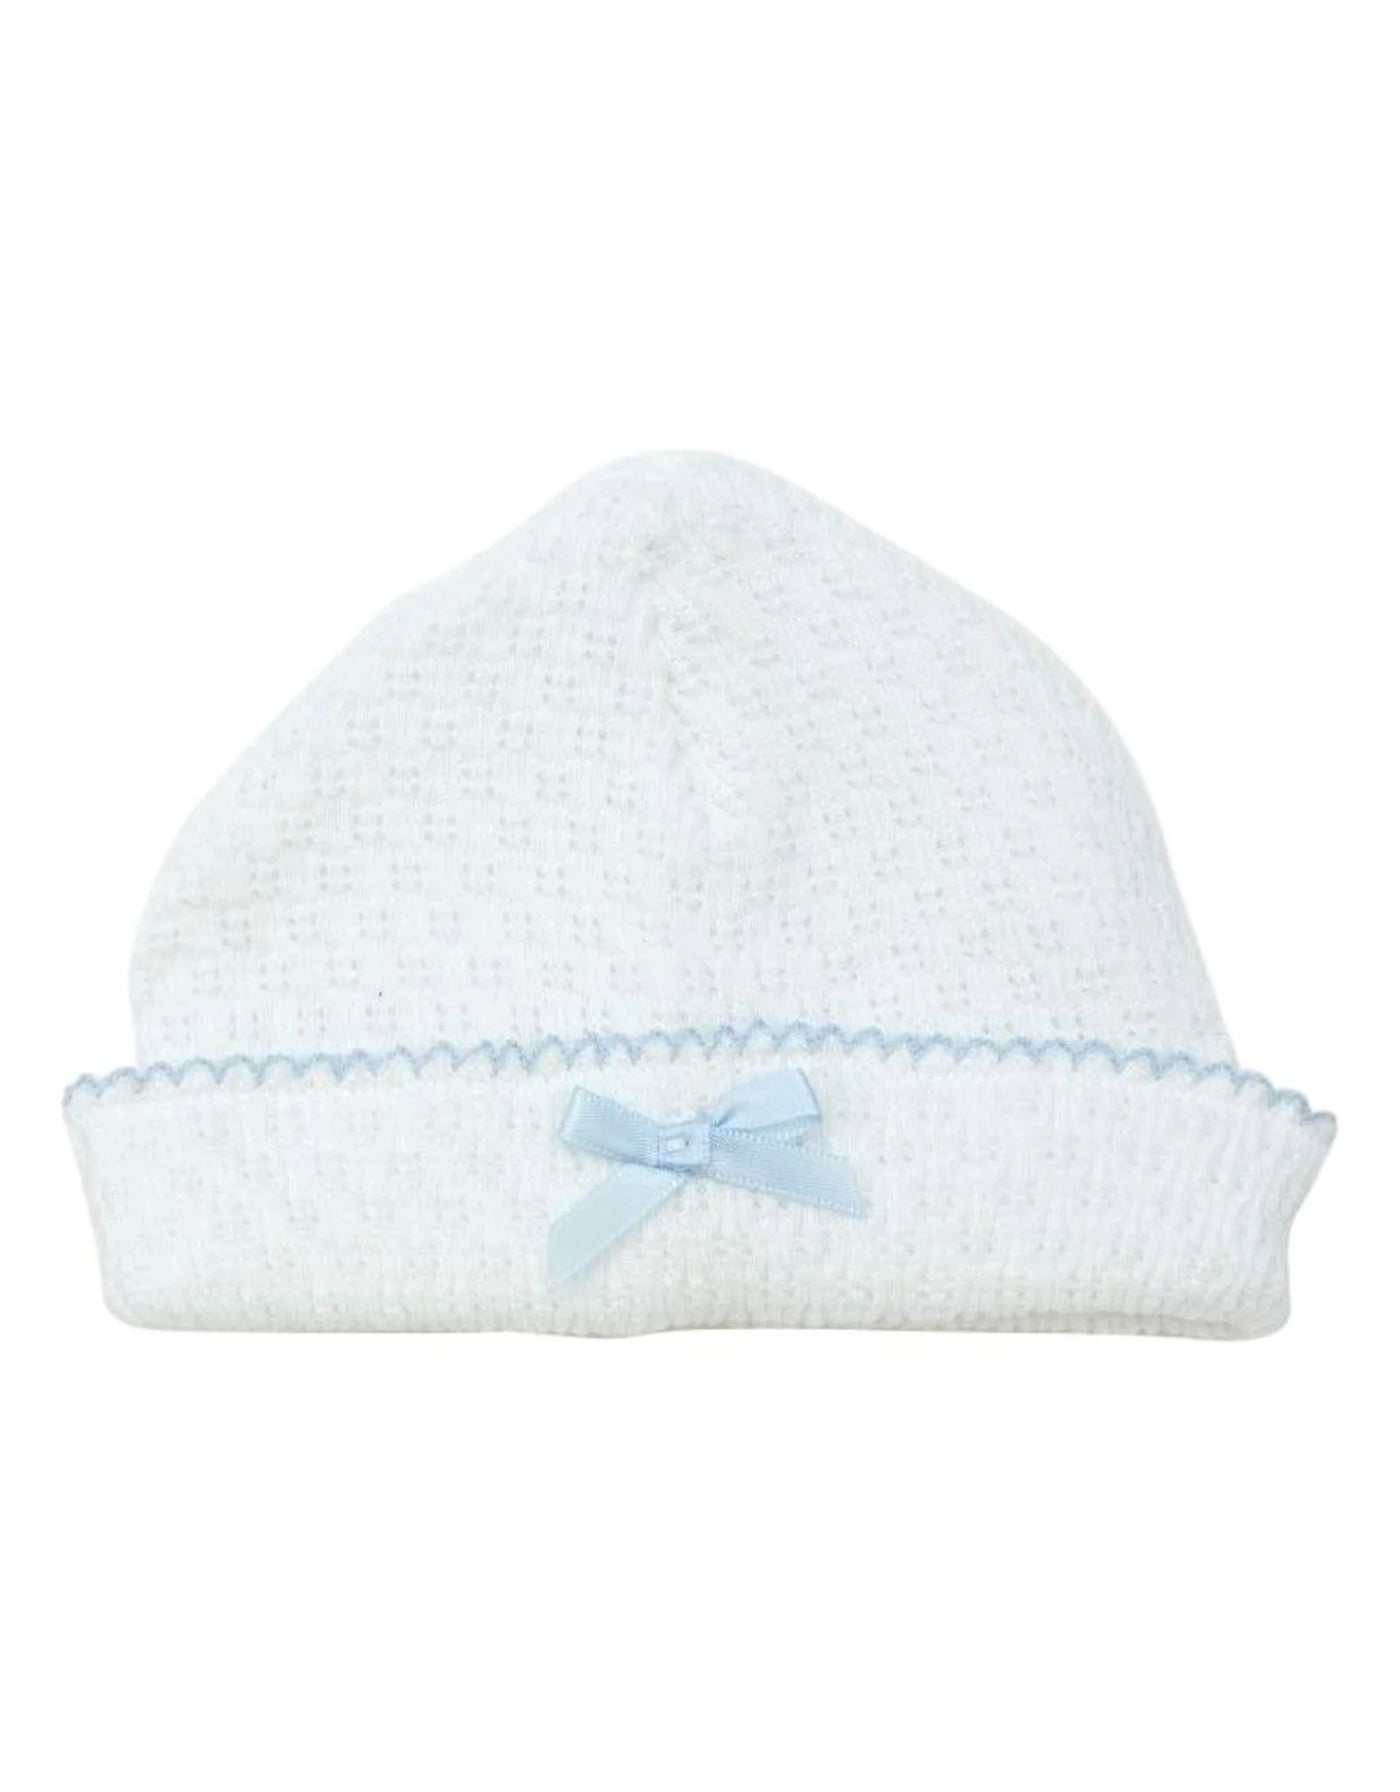 White cap with blue trim and bow